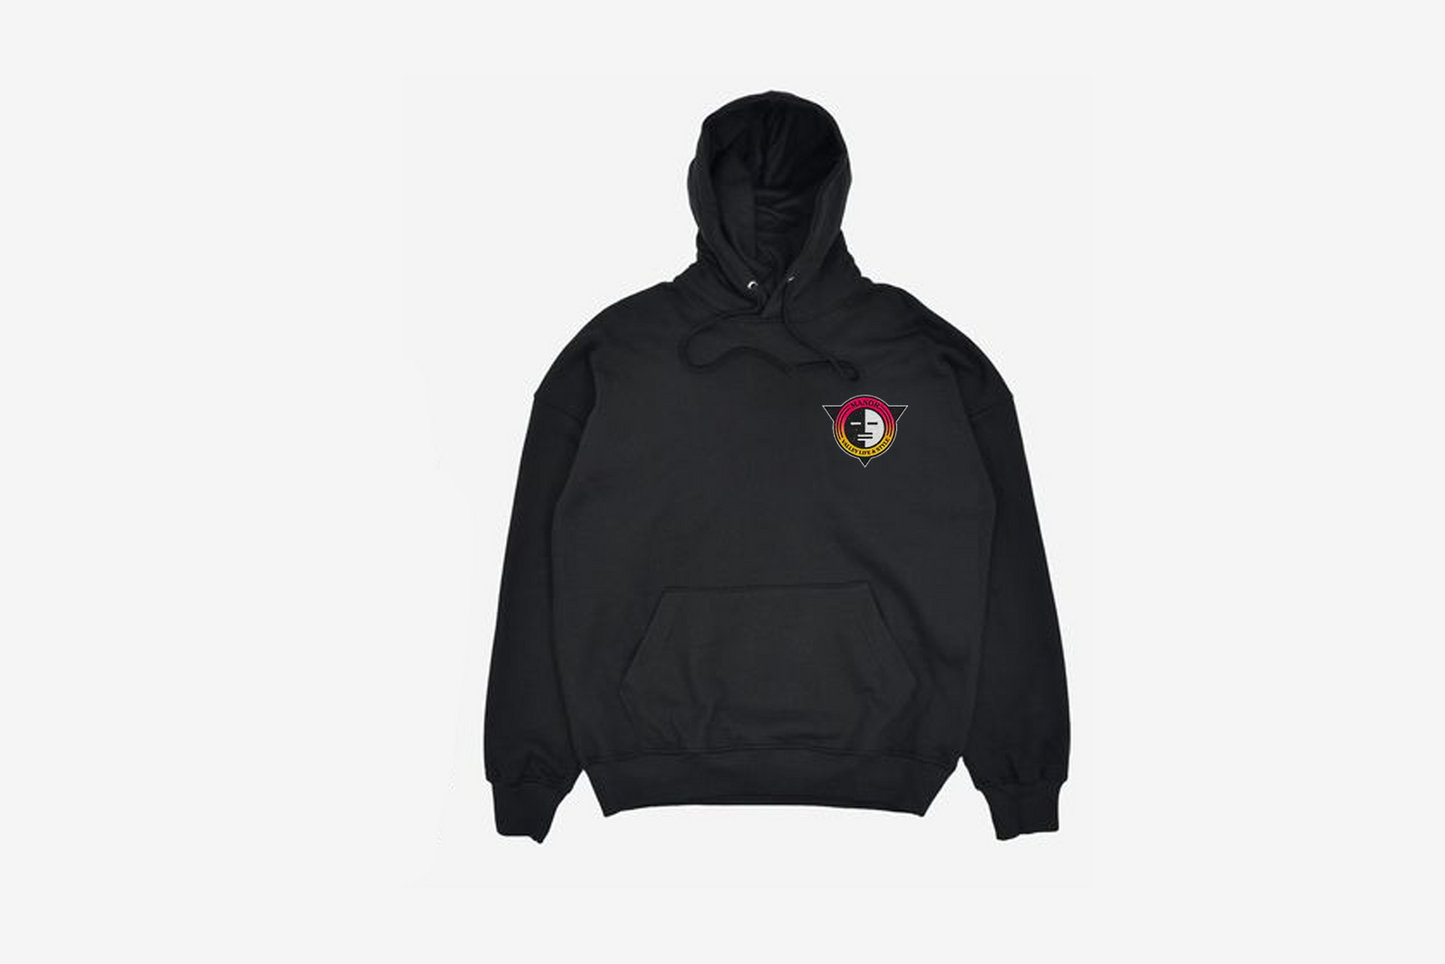 Manor "Never a Doubt Hoodie" M - Black / Sunset / Galaxy